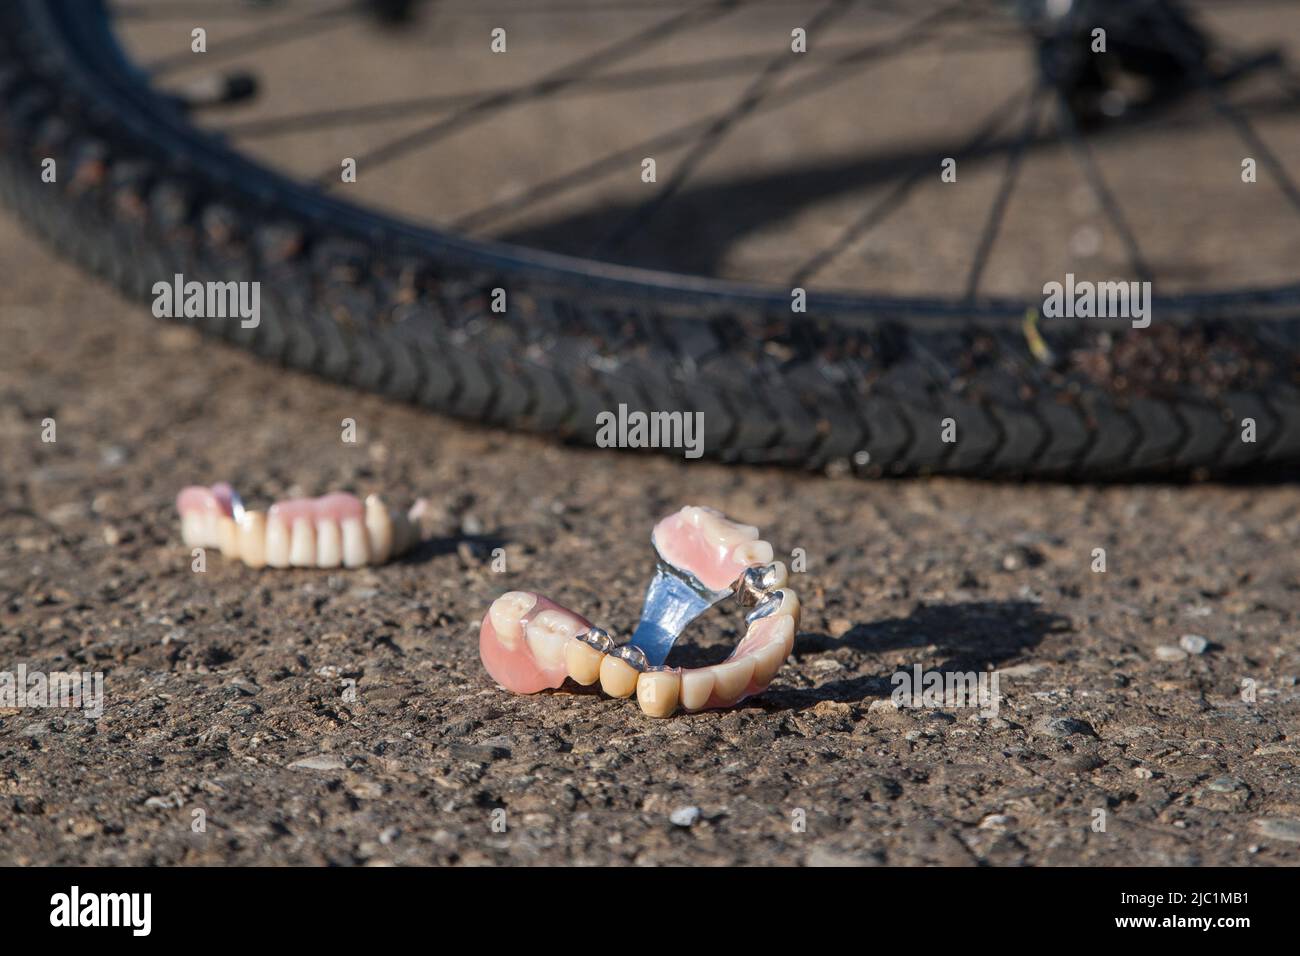 Denture and a fallen bike on the street. A fall from a bicycle often has tragic consequences. Stock Photo